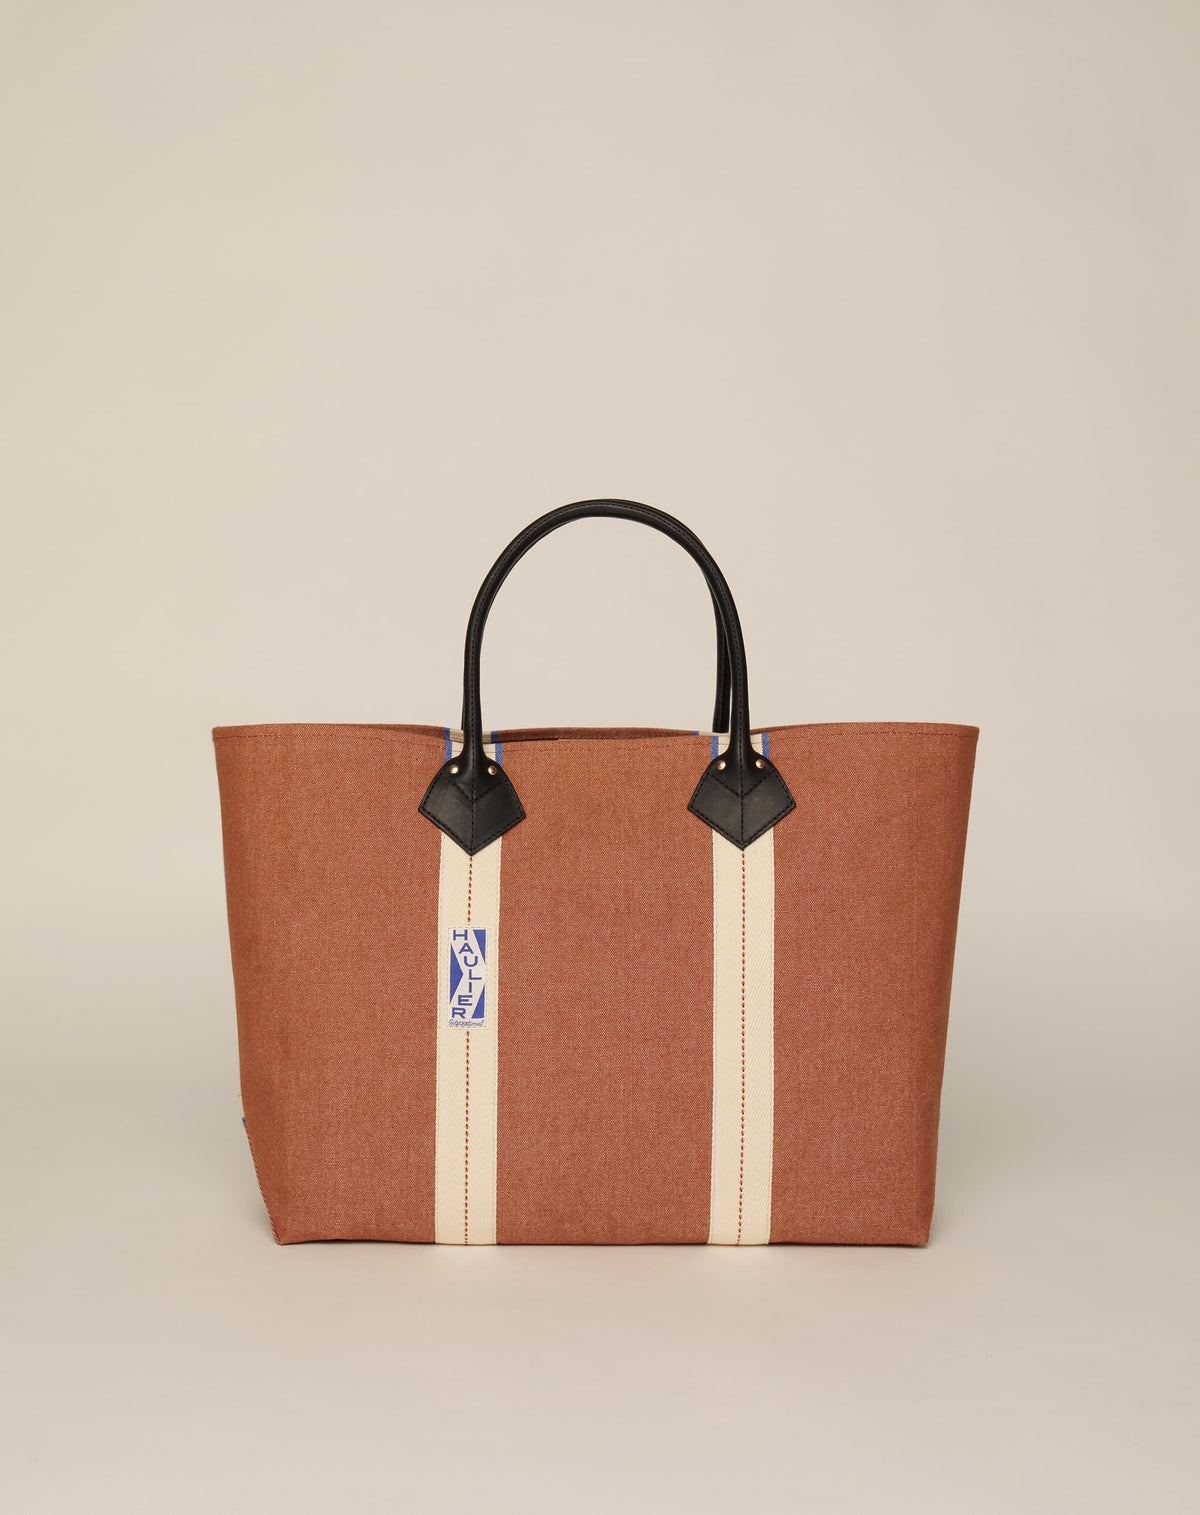 Image of classic canvas tote bag in tan colour with black leather handles and contrasting natural ecru stripes.